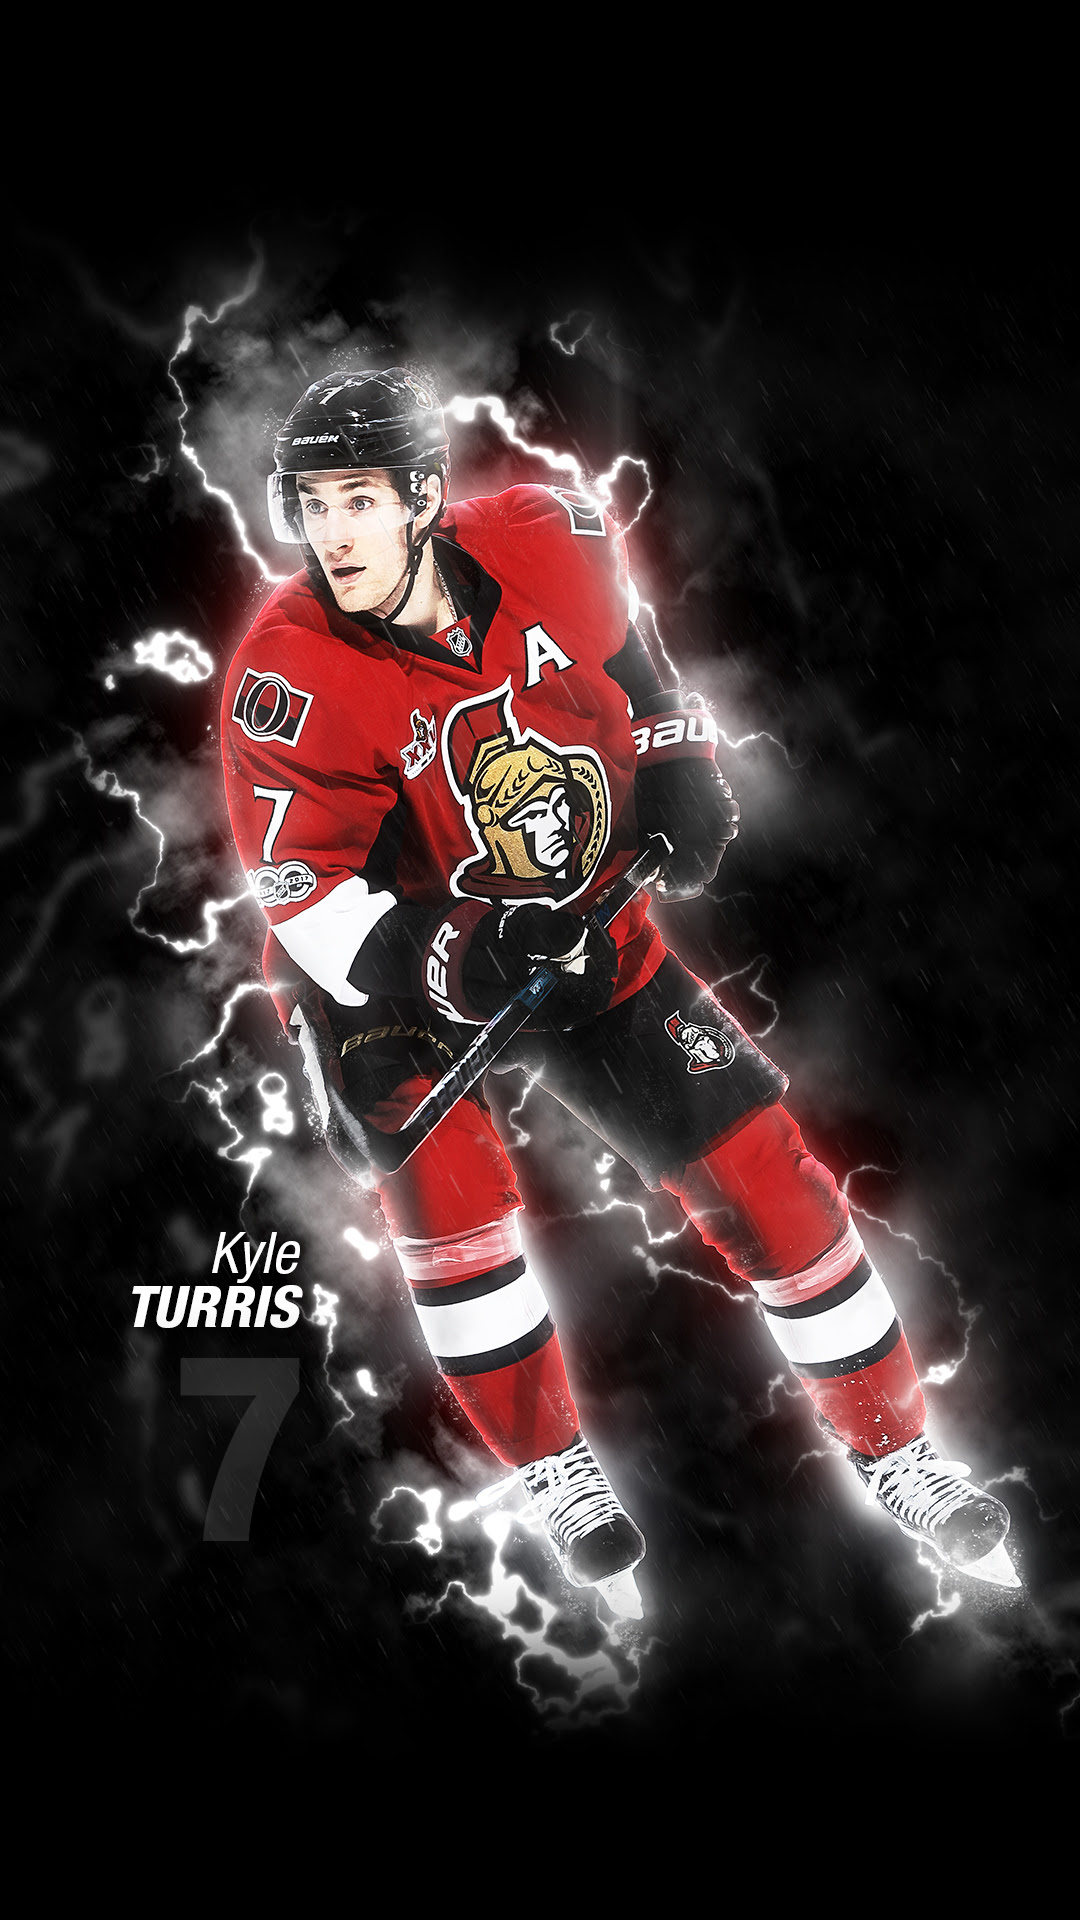 High definition and quality wallpaper and wallpapers, in high resolution, in hd and 1080p or 720p resolution ottawa senators is free available on our web site. Wallpapers And Backgrounds Ottawa Senators